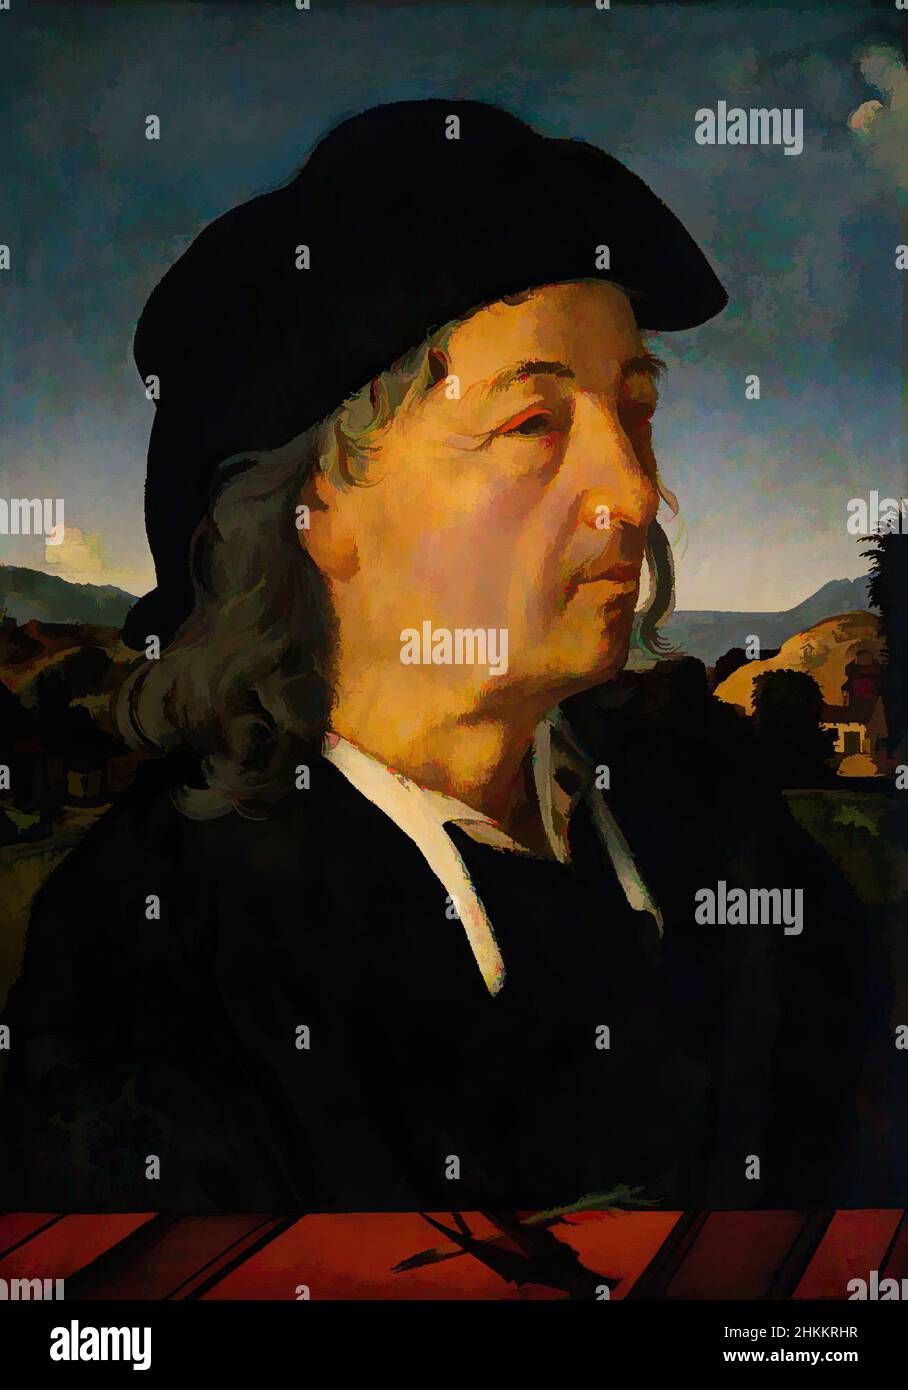 Art inspired by Portrait of Giuliano da Sangallo 1445-1516, son of Francesco Giamberti, Piero di Cosimo, after c. 1482, Classic works modernized by Artotop with a splash of modernity. Shapes, color and value, eye-catching visual impact on art. Emotions through freedom of artworks in a contemporary way. A timeless message pursuing a wildly creative new direction. Artists turning to the digital medium and creating the Artotop NFT Stock Photo